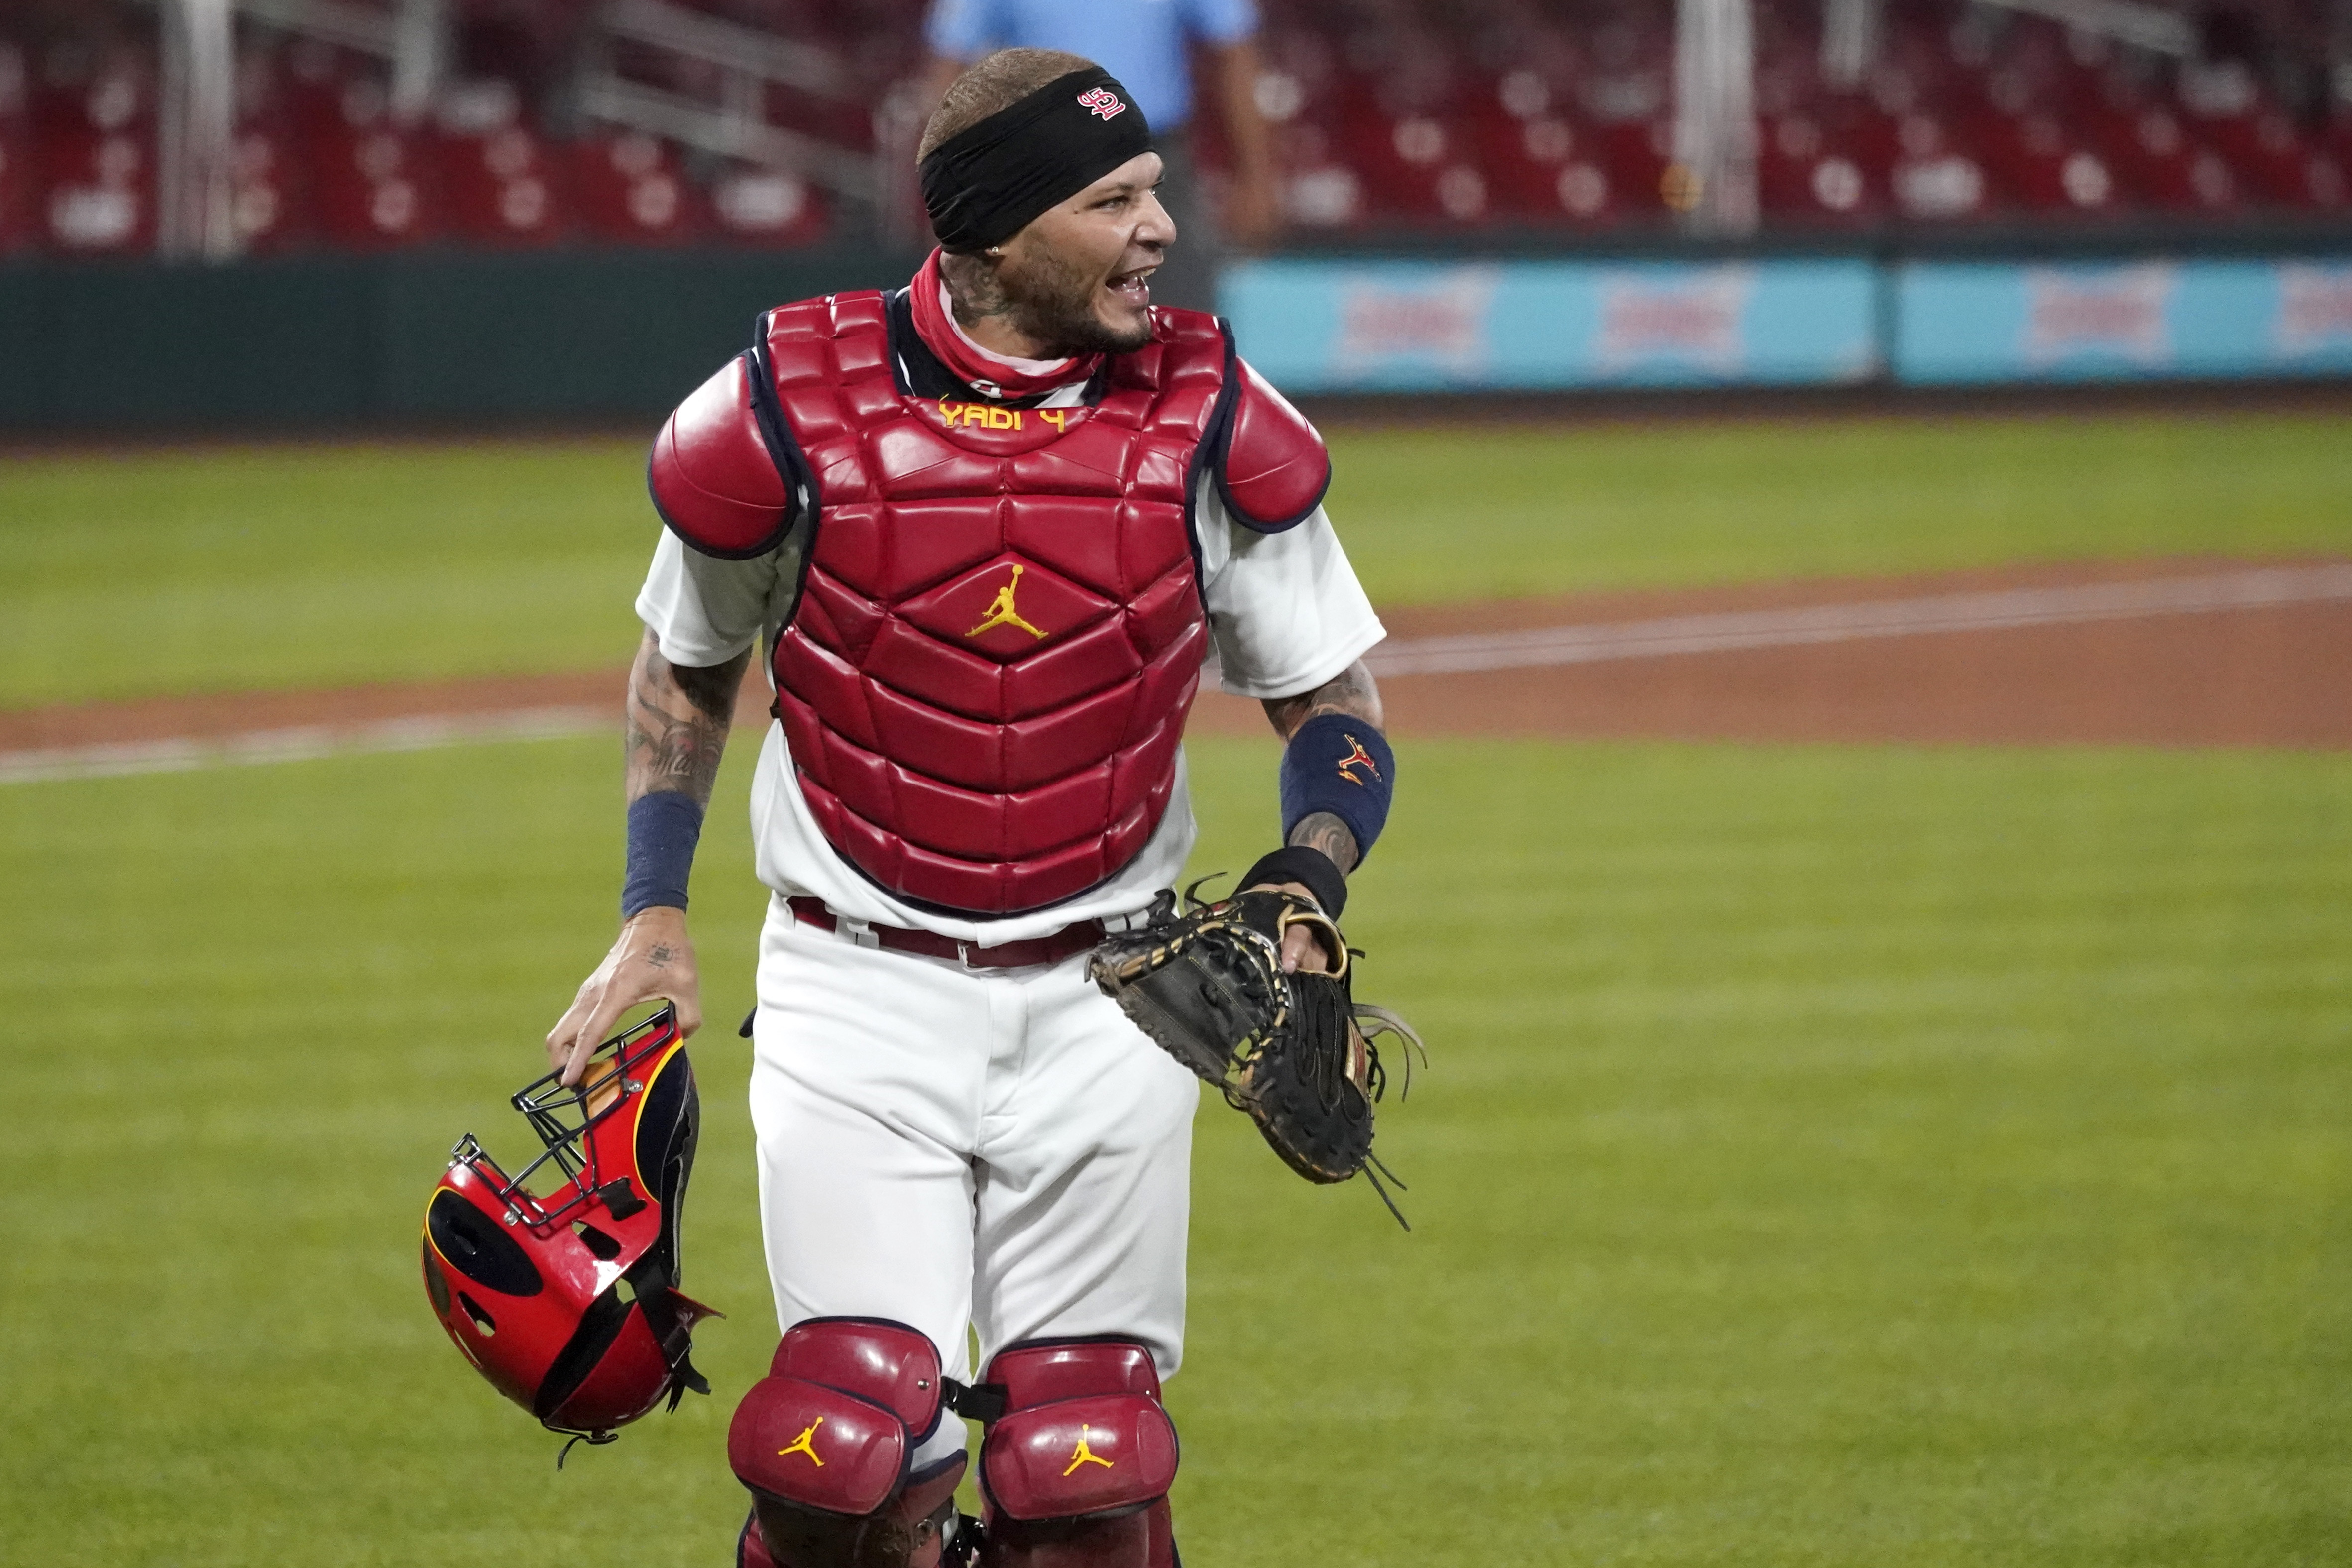 All-star catcher Yadier Molina top St. Louis Cardinals' player saying he  tested positive for coronavirus